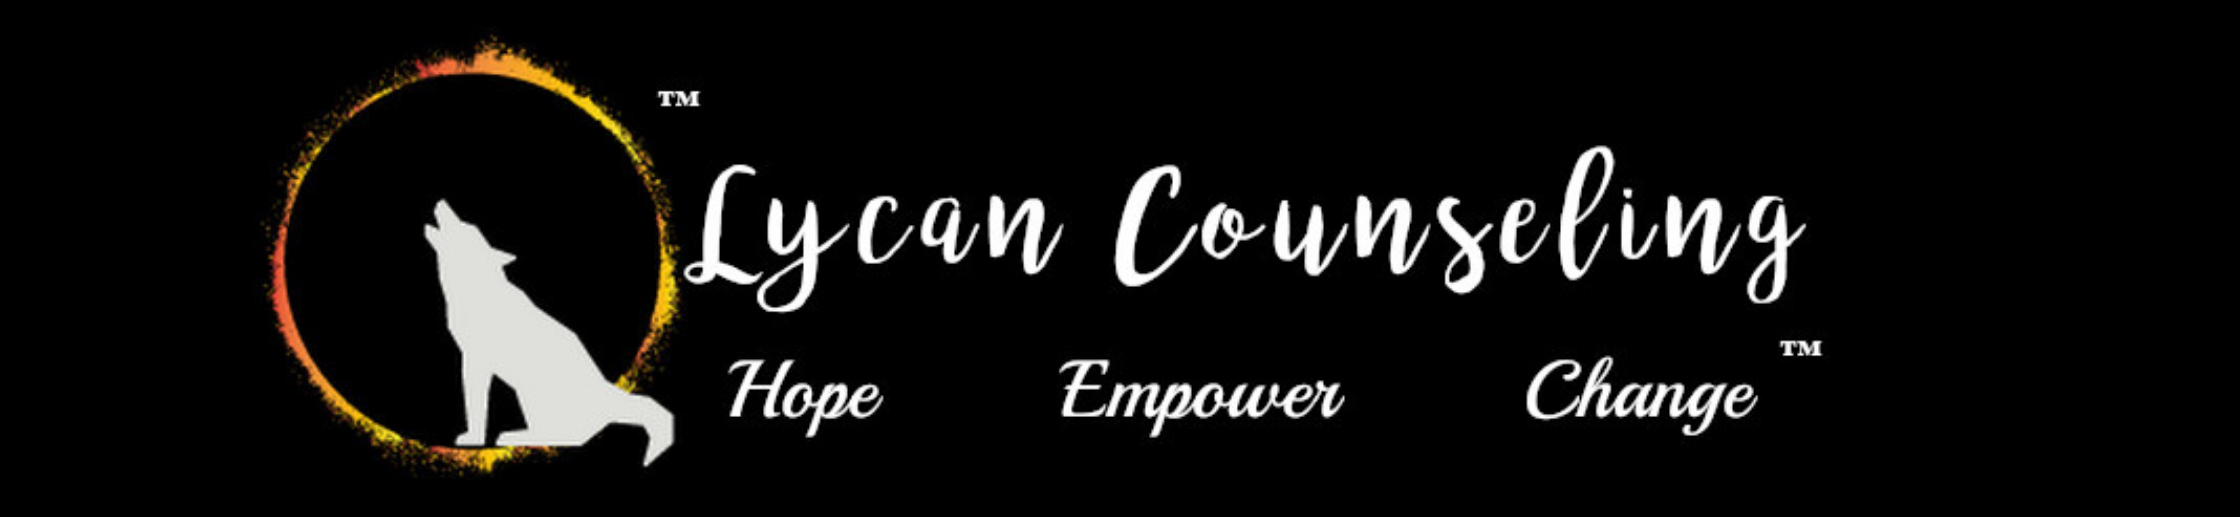 The banner is black with a white silhouette of a howling wolf surrounded by an orange and yellow circle that looks like an eclipse. The main text is white and reads "Lycan Counseling". The subtext is white and reads "Hope. Empower. Change."